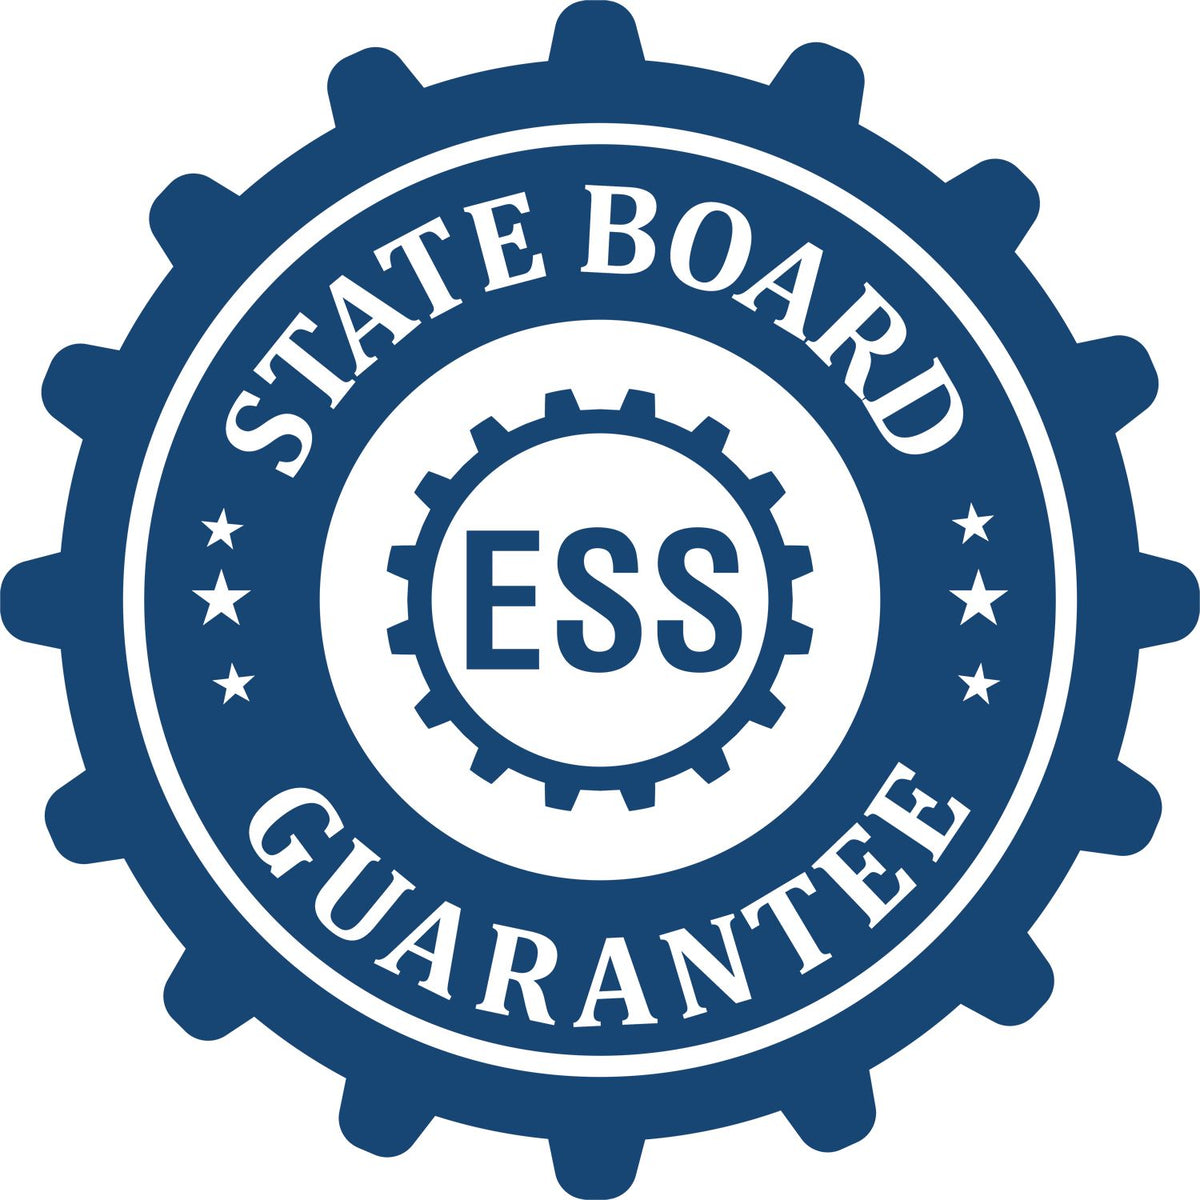 An emblem in a gear shape illustrating a state board guarantee for the Wooden Handle Nevada State Seal Notary Public Stamp product.